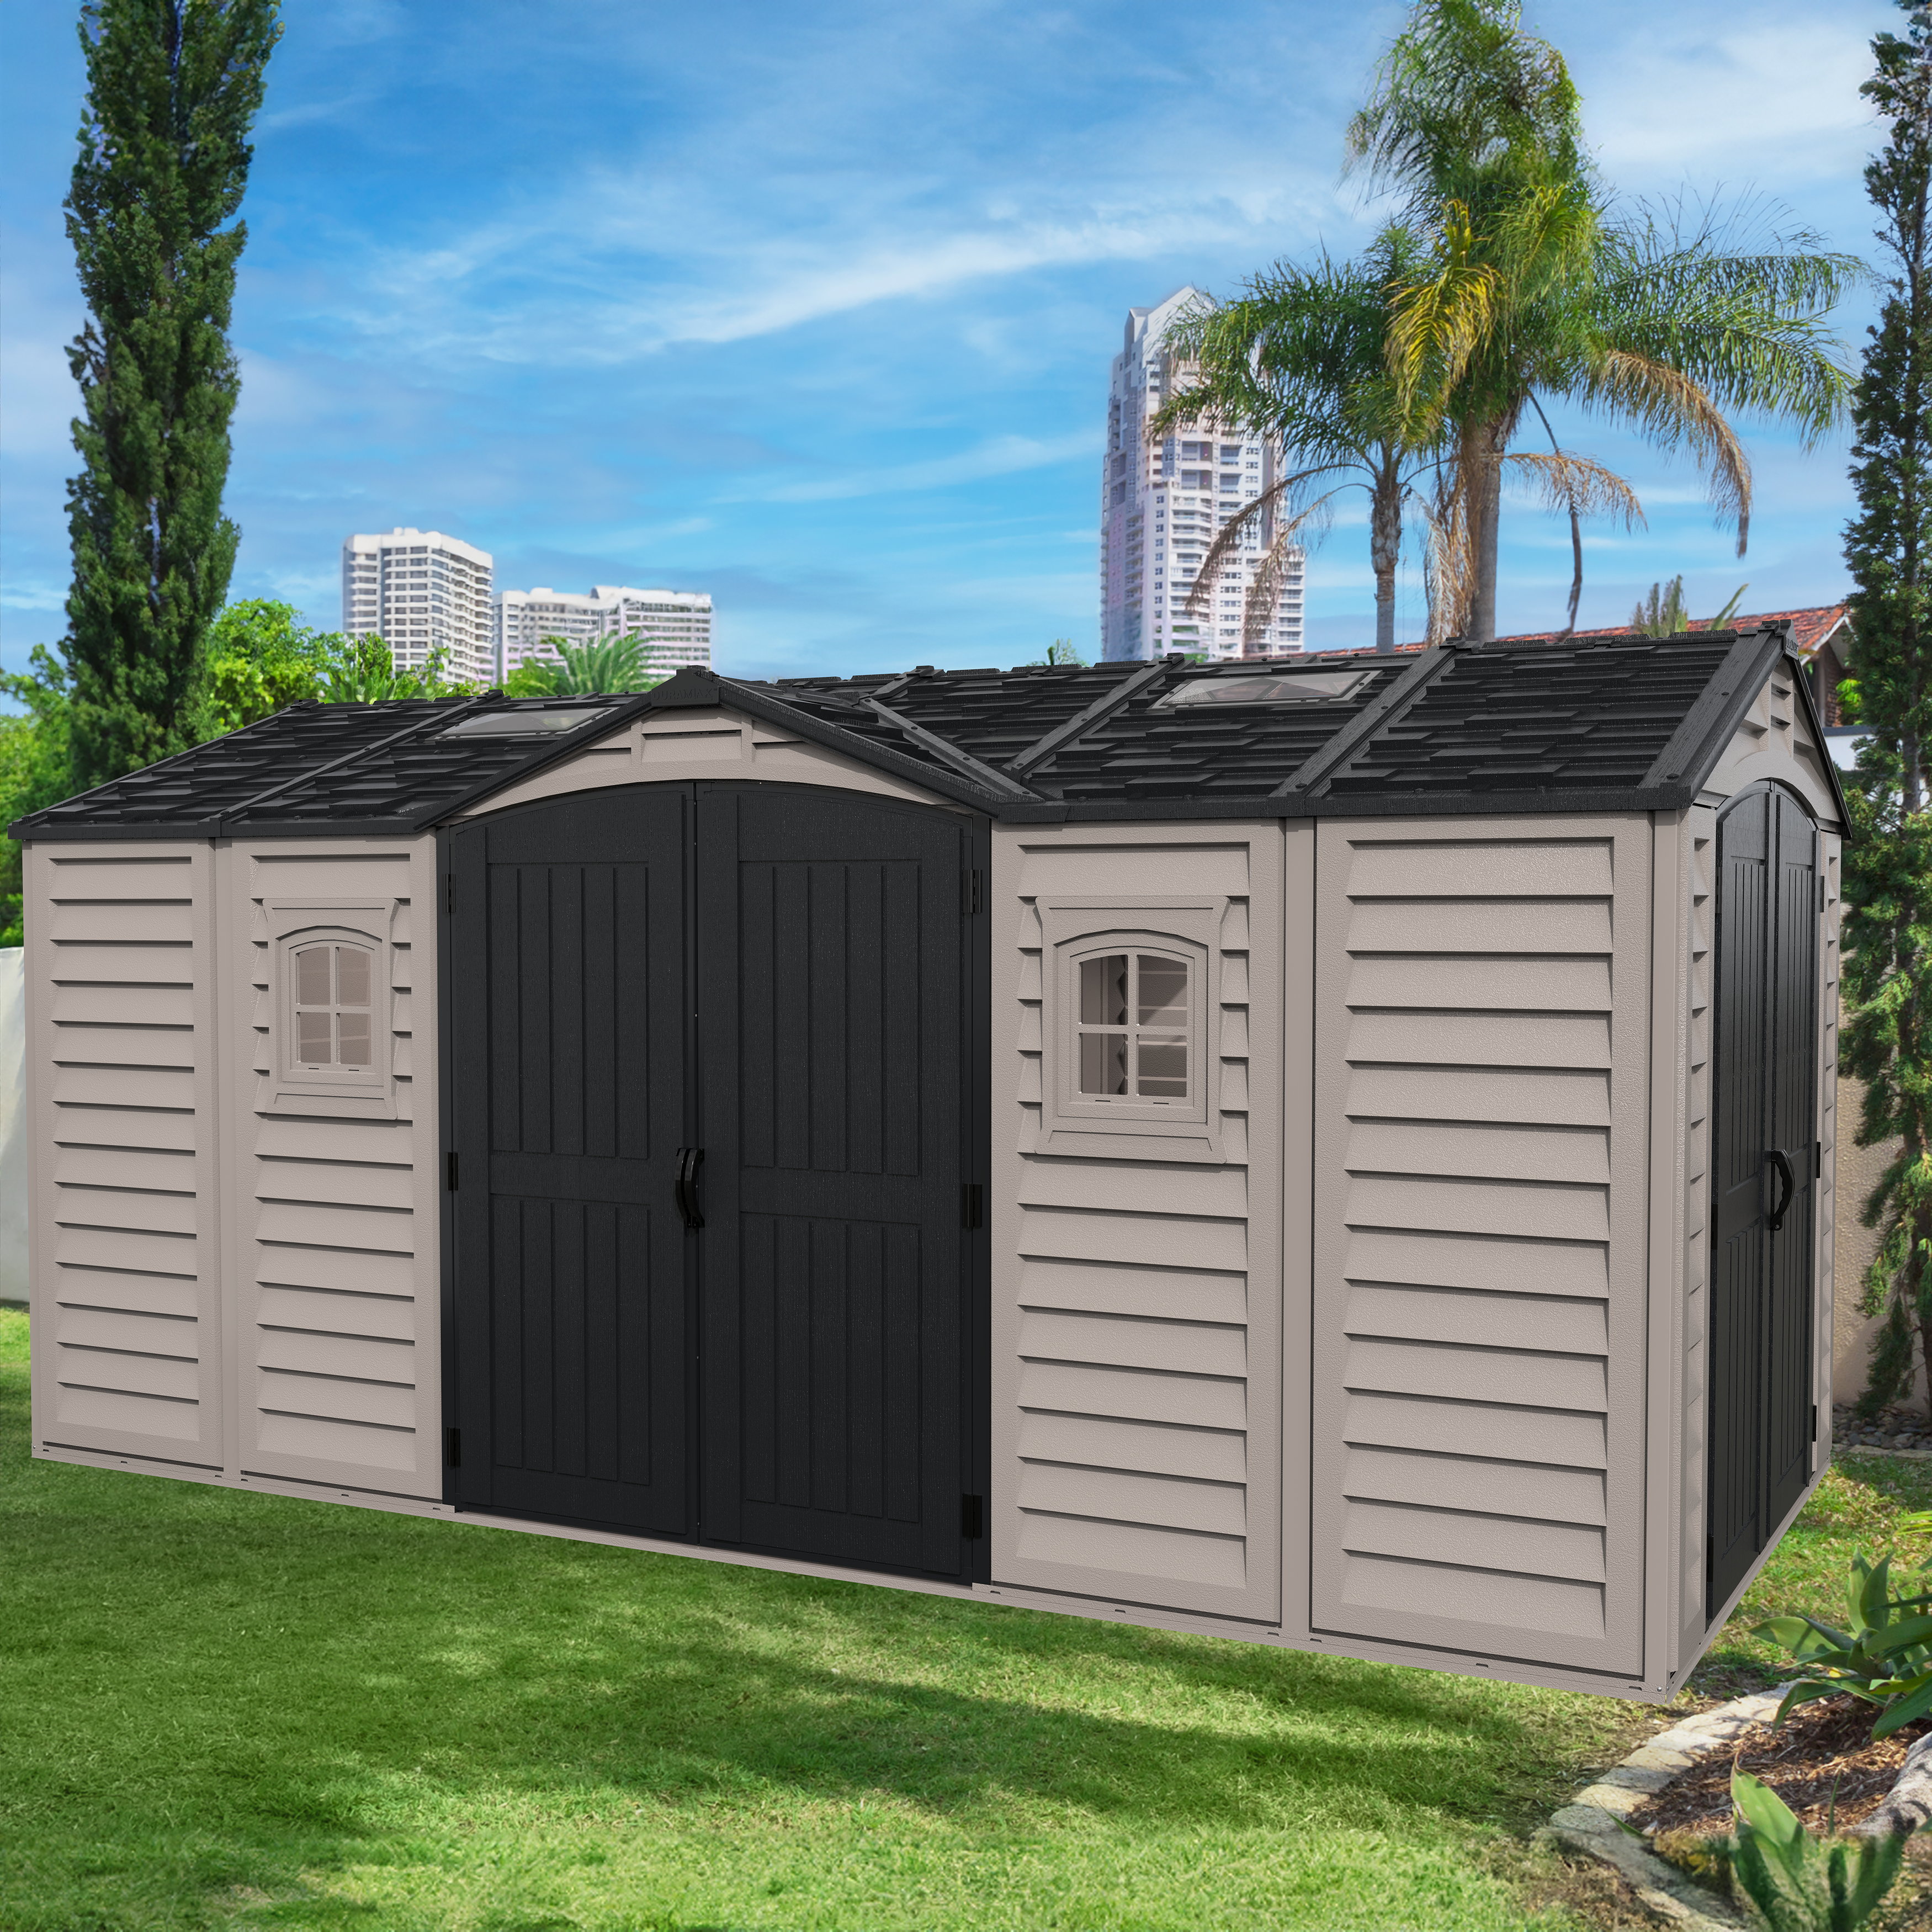 Duramax 15 x 8 Apex Pro Vinyl Shed with Foundation, 2 Windows and 2 Doors